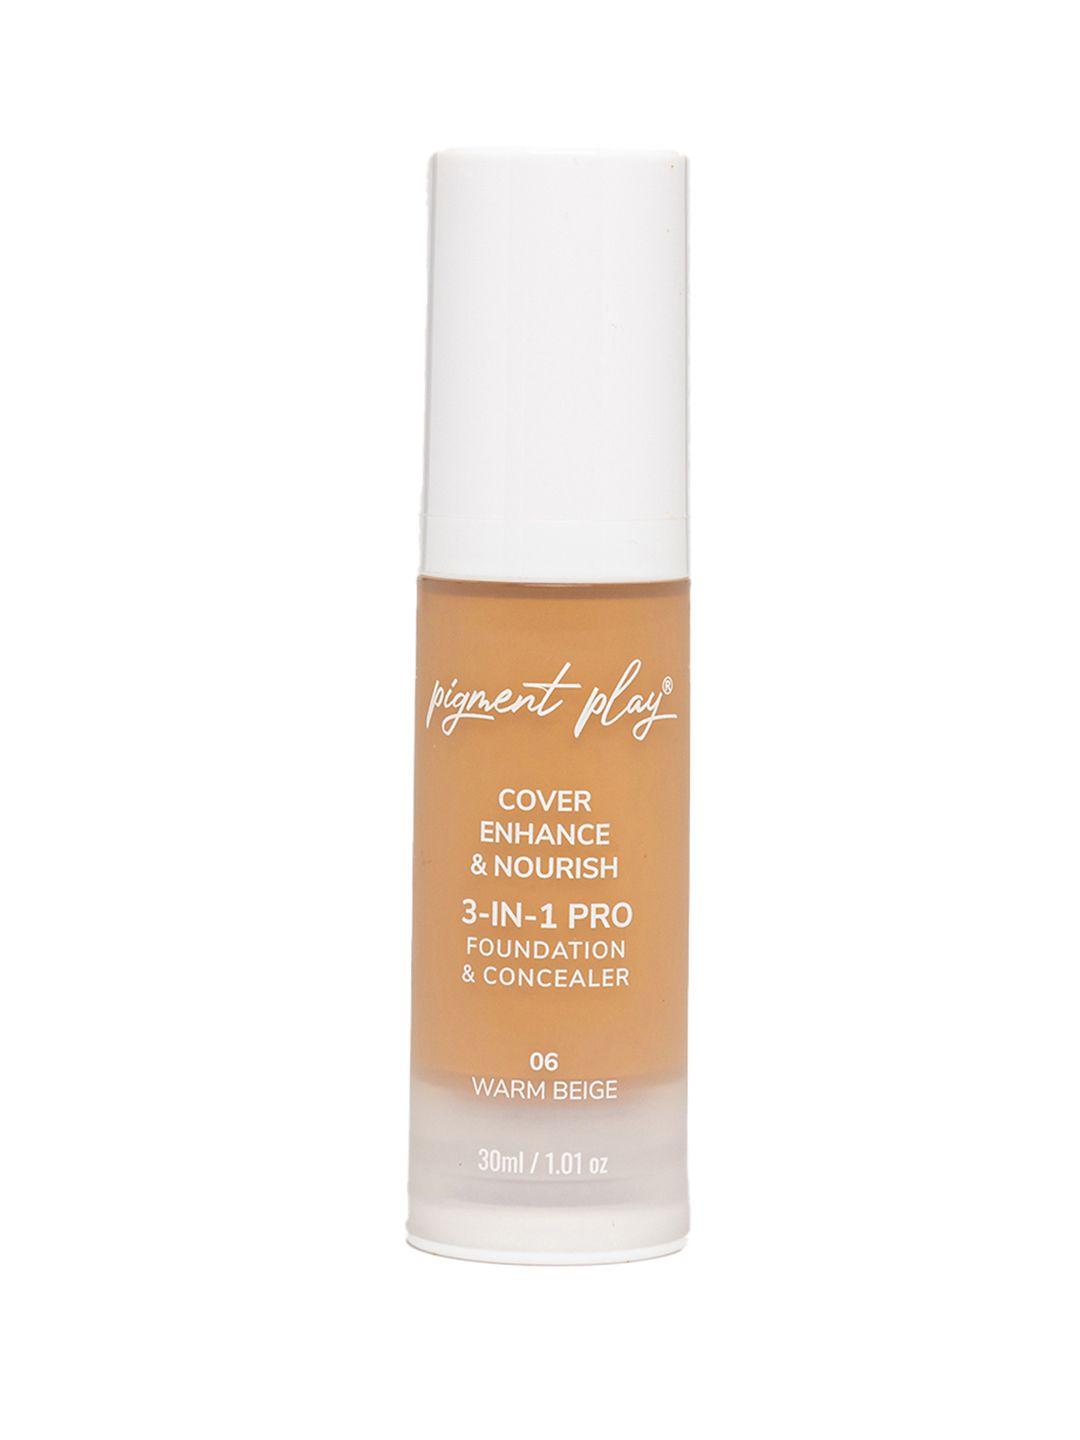 pigment play cover enhance & nourish 3-in-1 pro foundation&concealer 30ml - warm beige 06